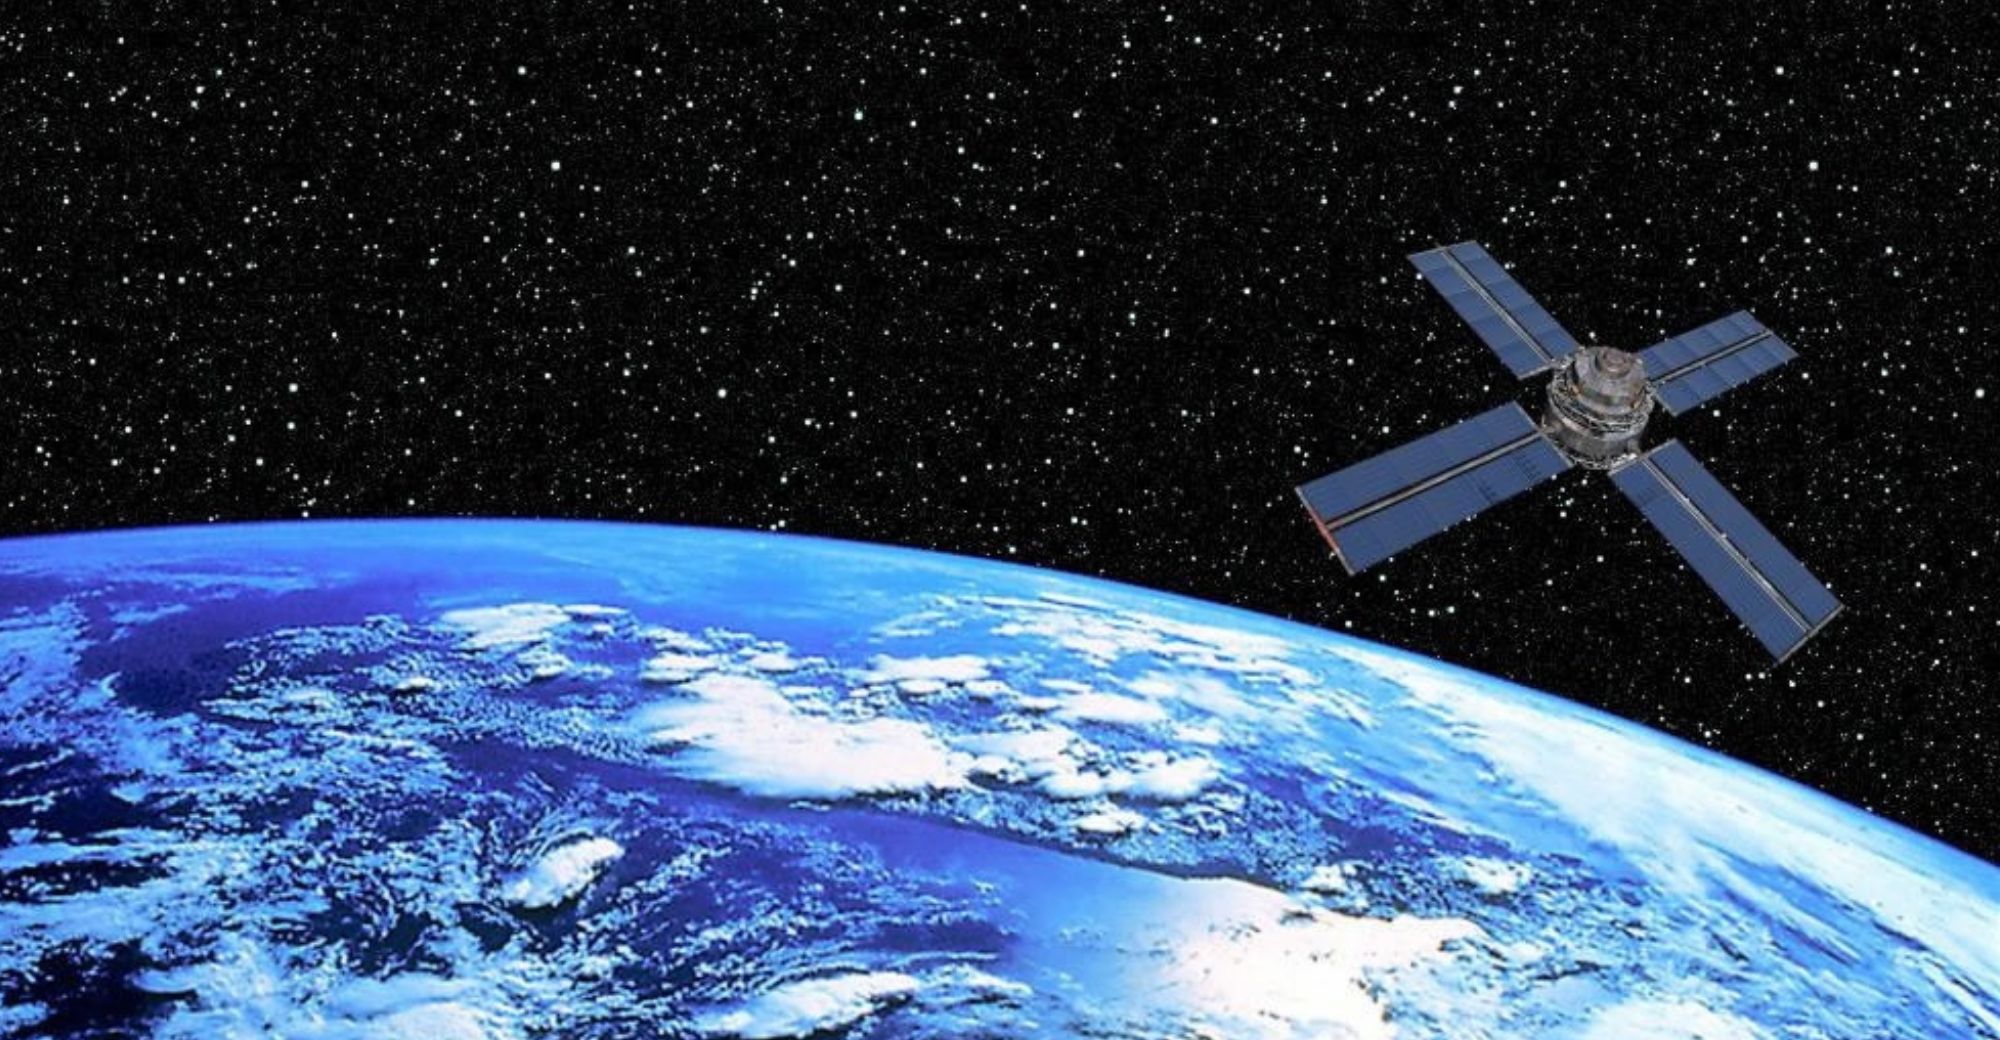 Main Products of China’s Two New Fengyun Meteorological Satellites to Be Open to Global Users